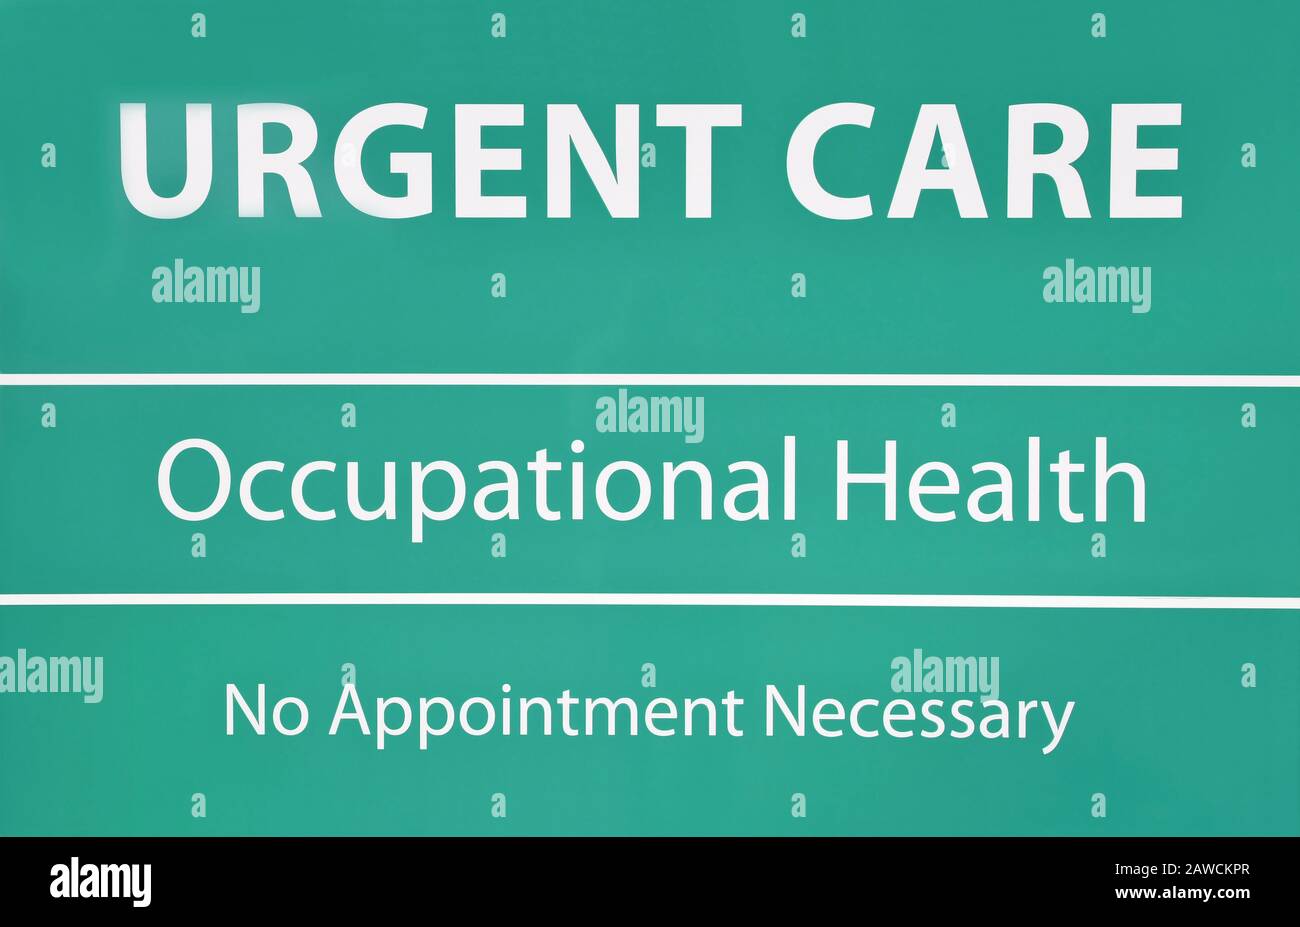 New Urgent Care and Occupational Health Sign with No Appointment Needed Stock Photo